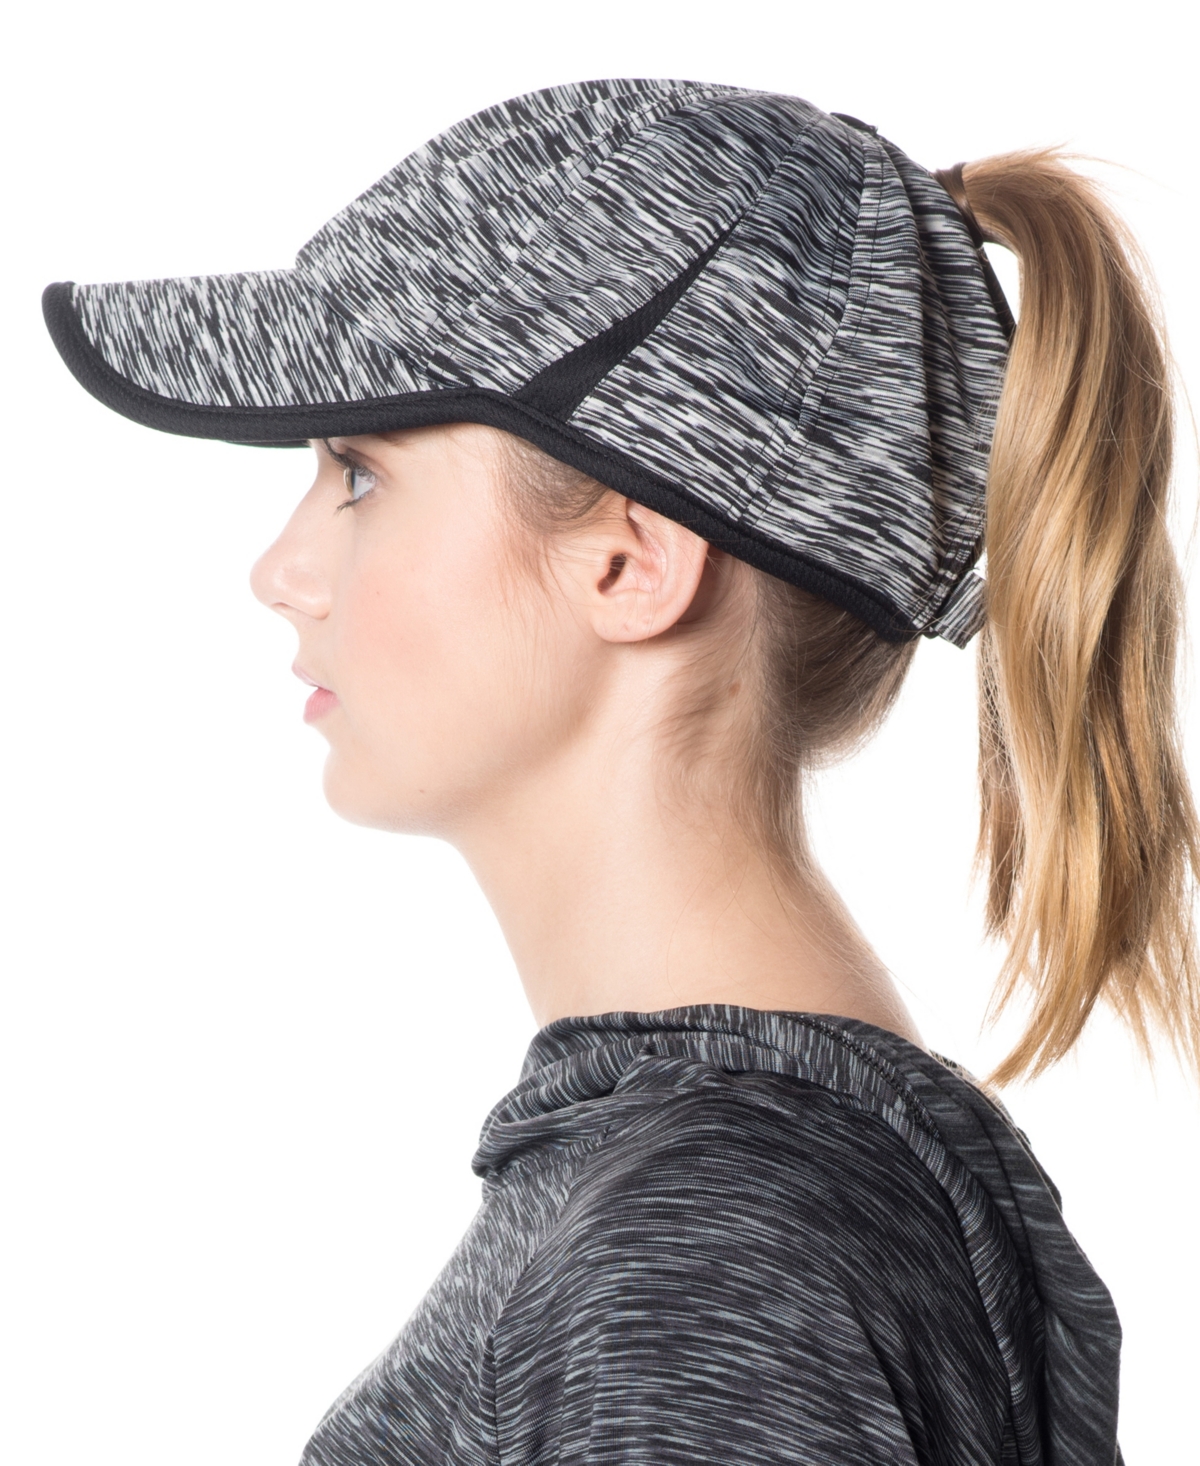 Shop Angela & William Women's Ponytail Messy Buns Yoga Ponycap With Zipper Opening In Gray